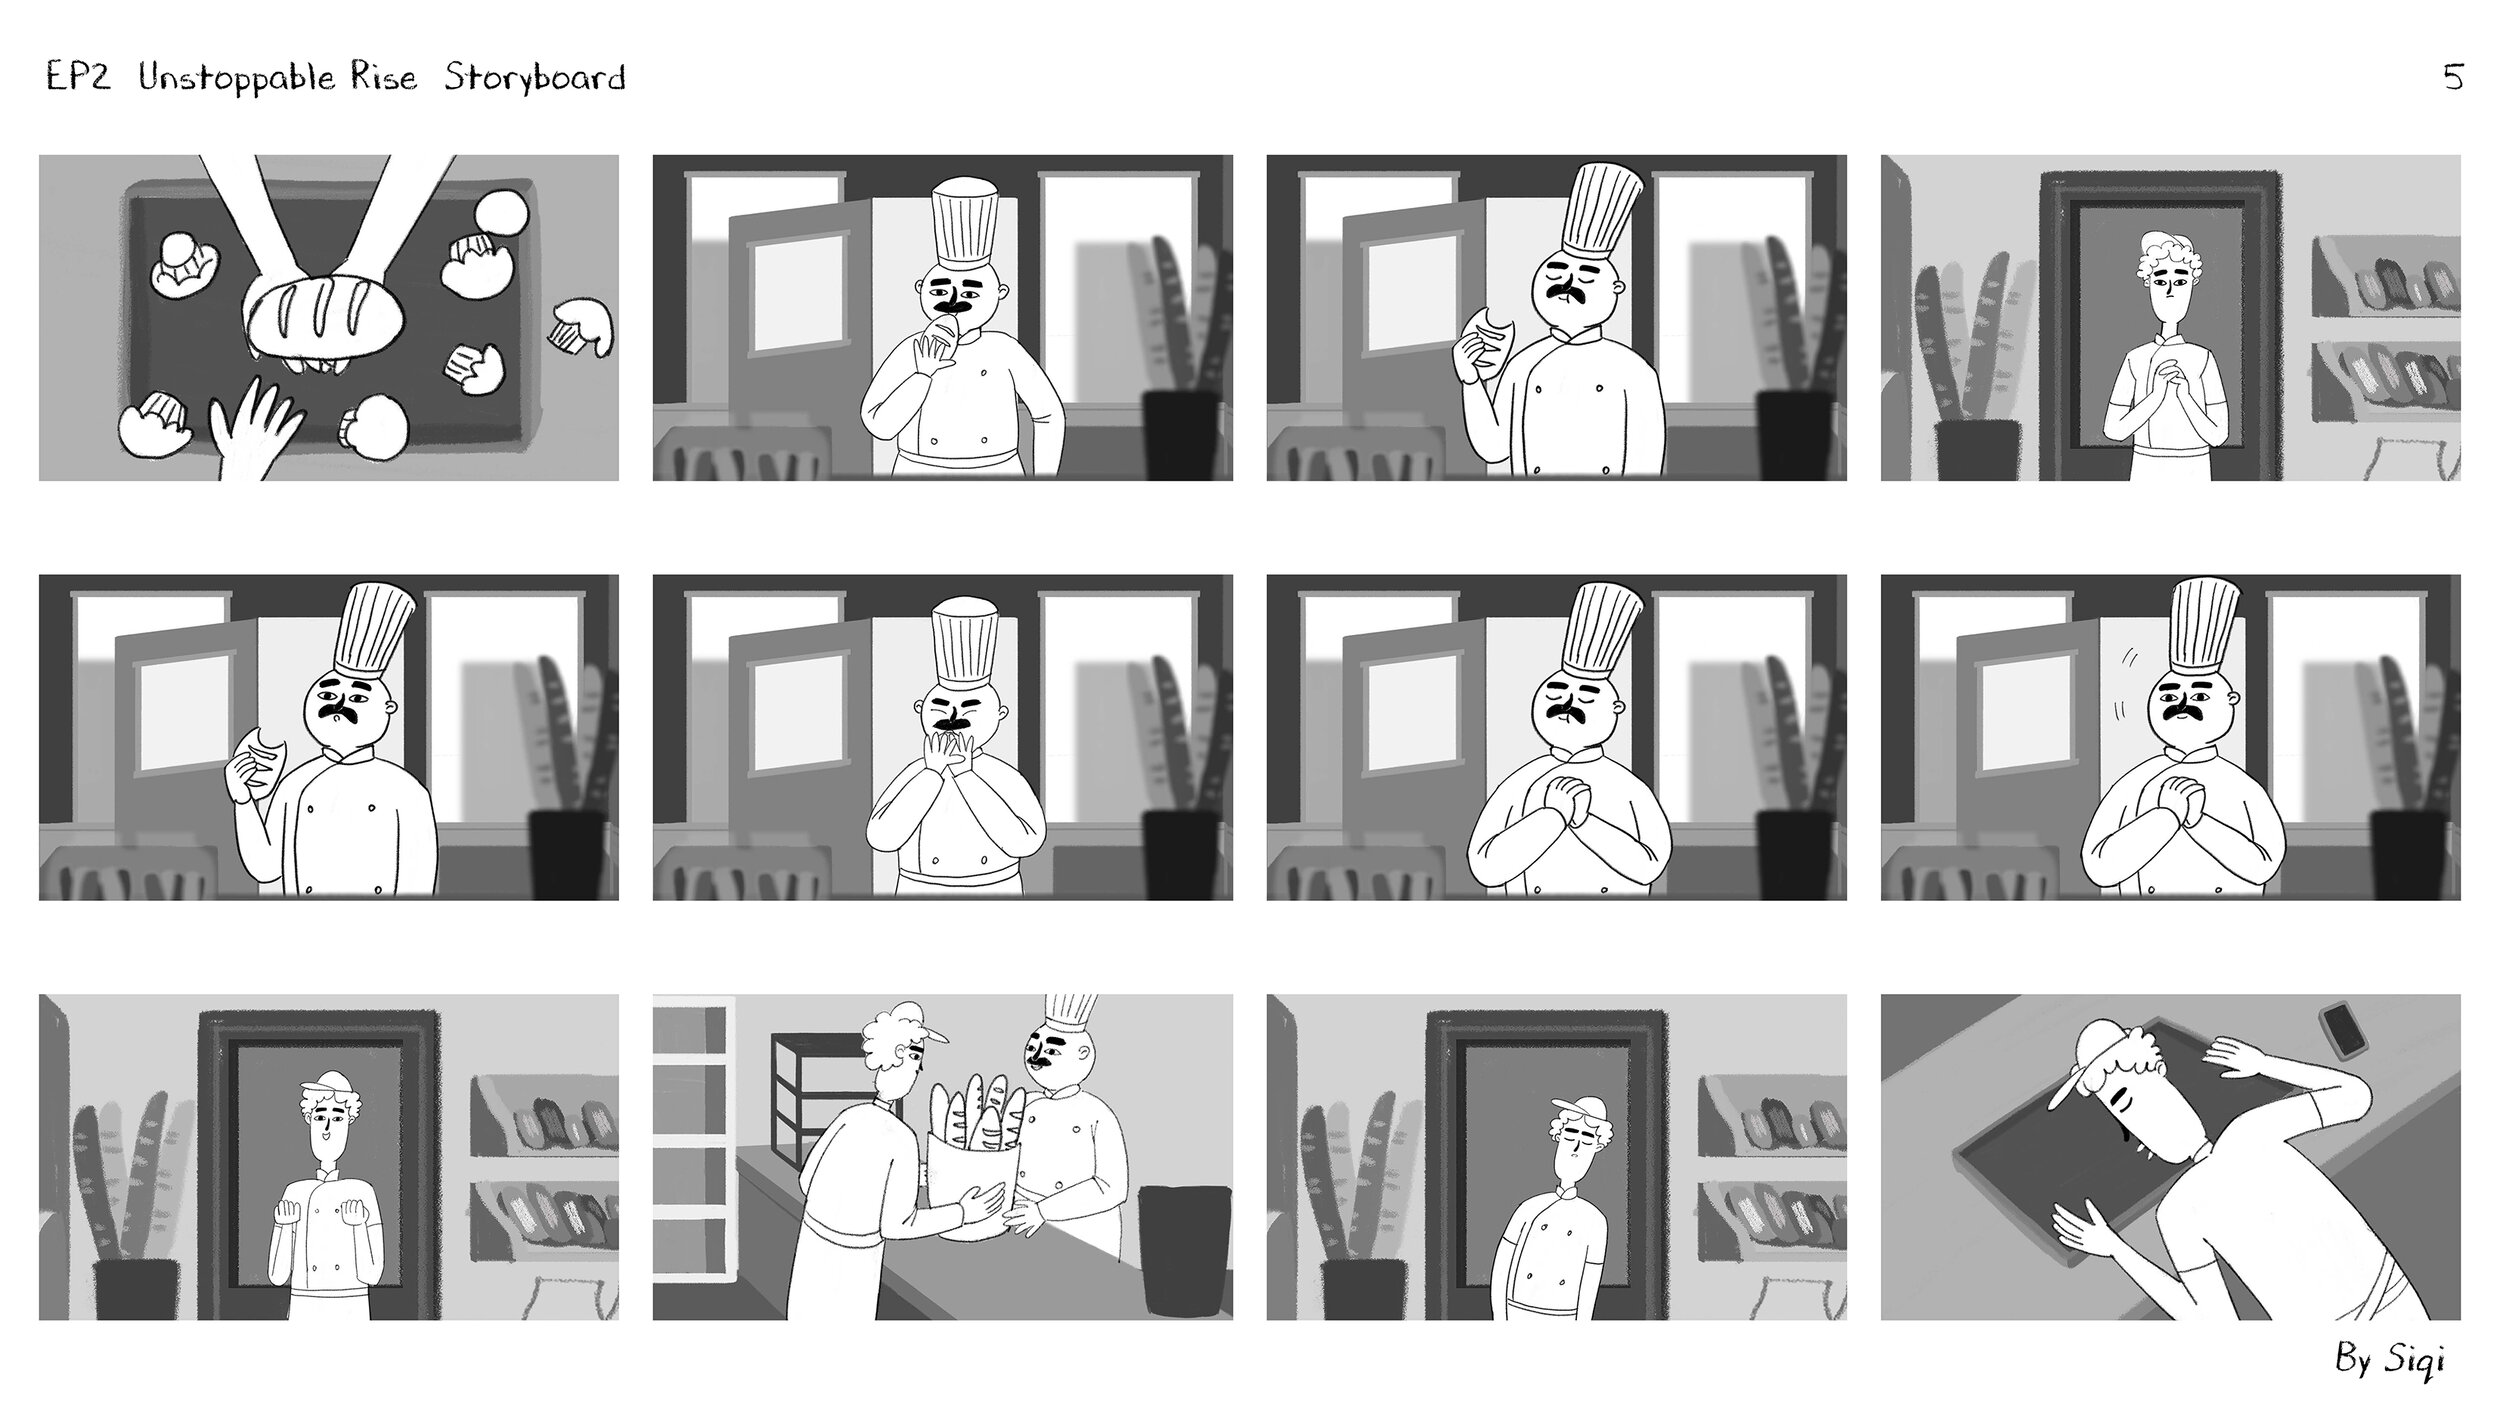 EP2_Unstoppable Rise_Storyboard_Page_5.jpg